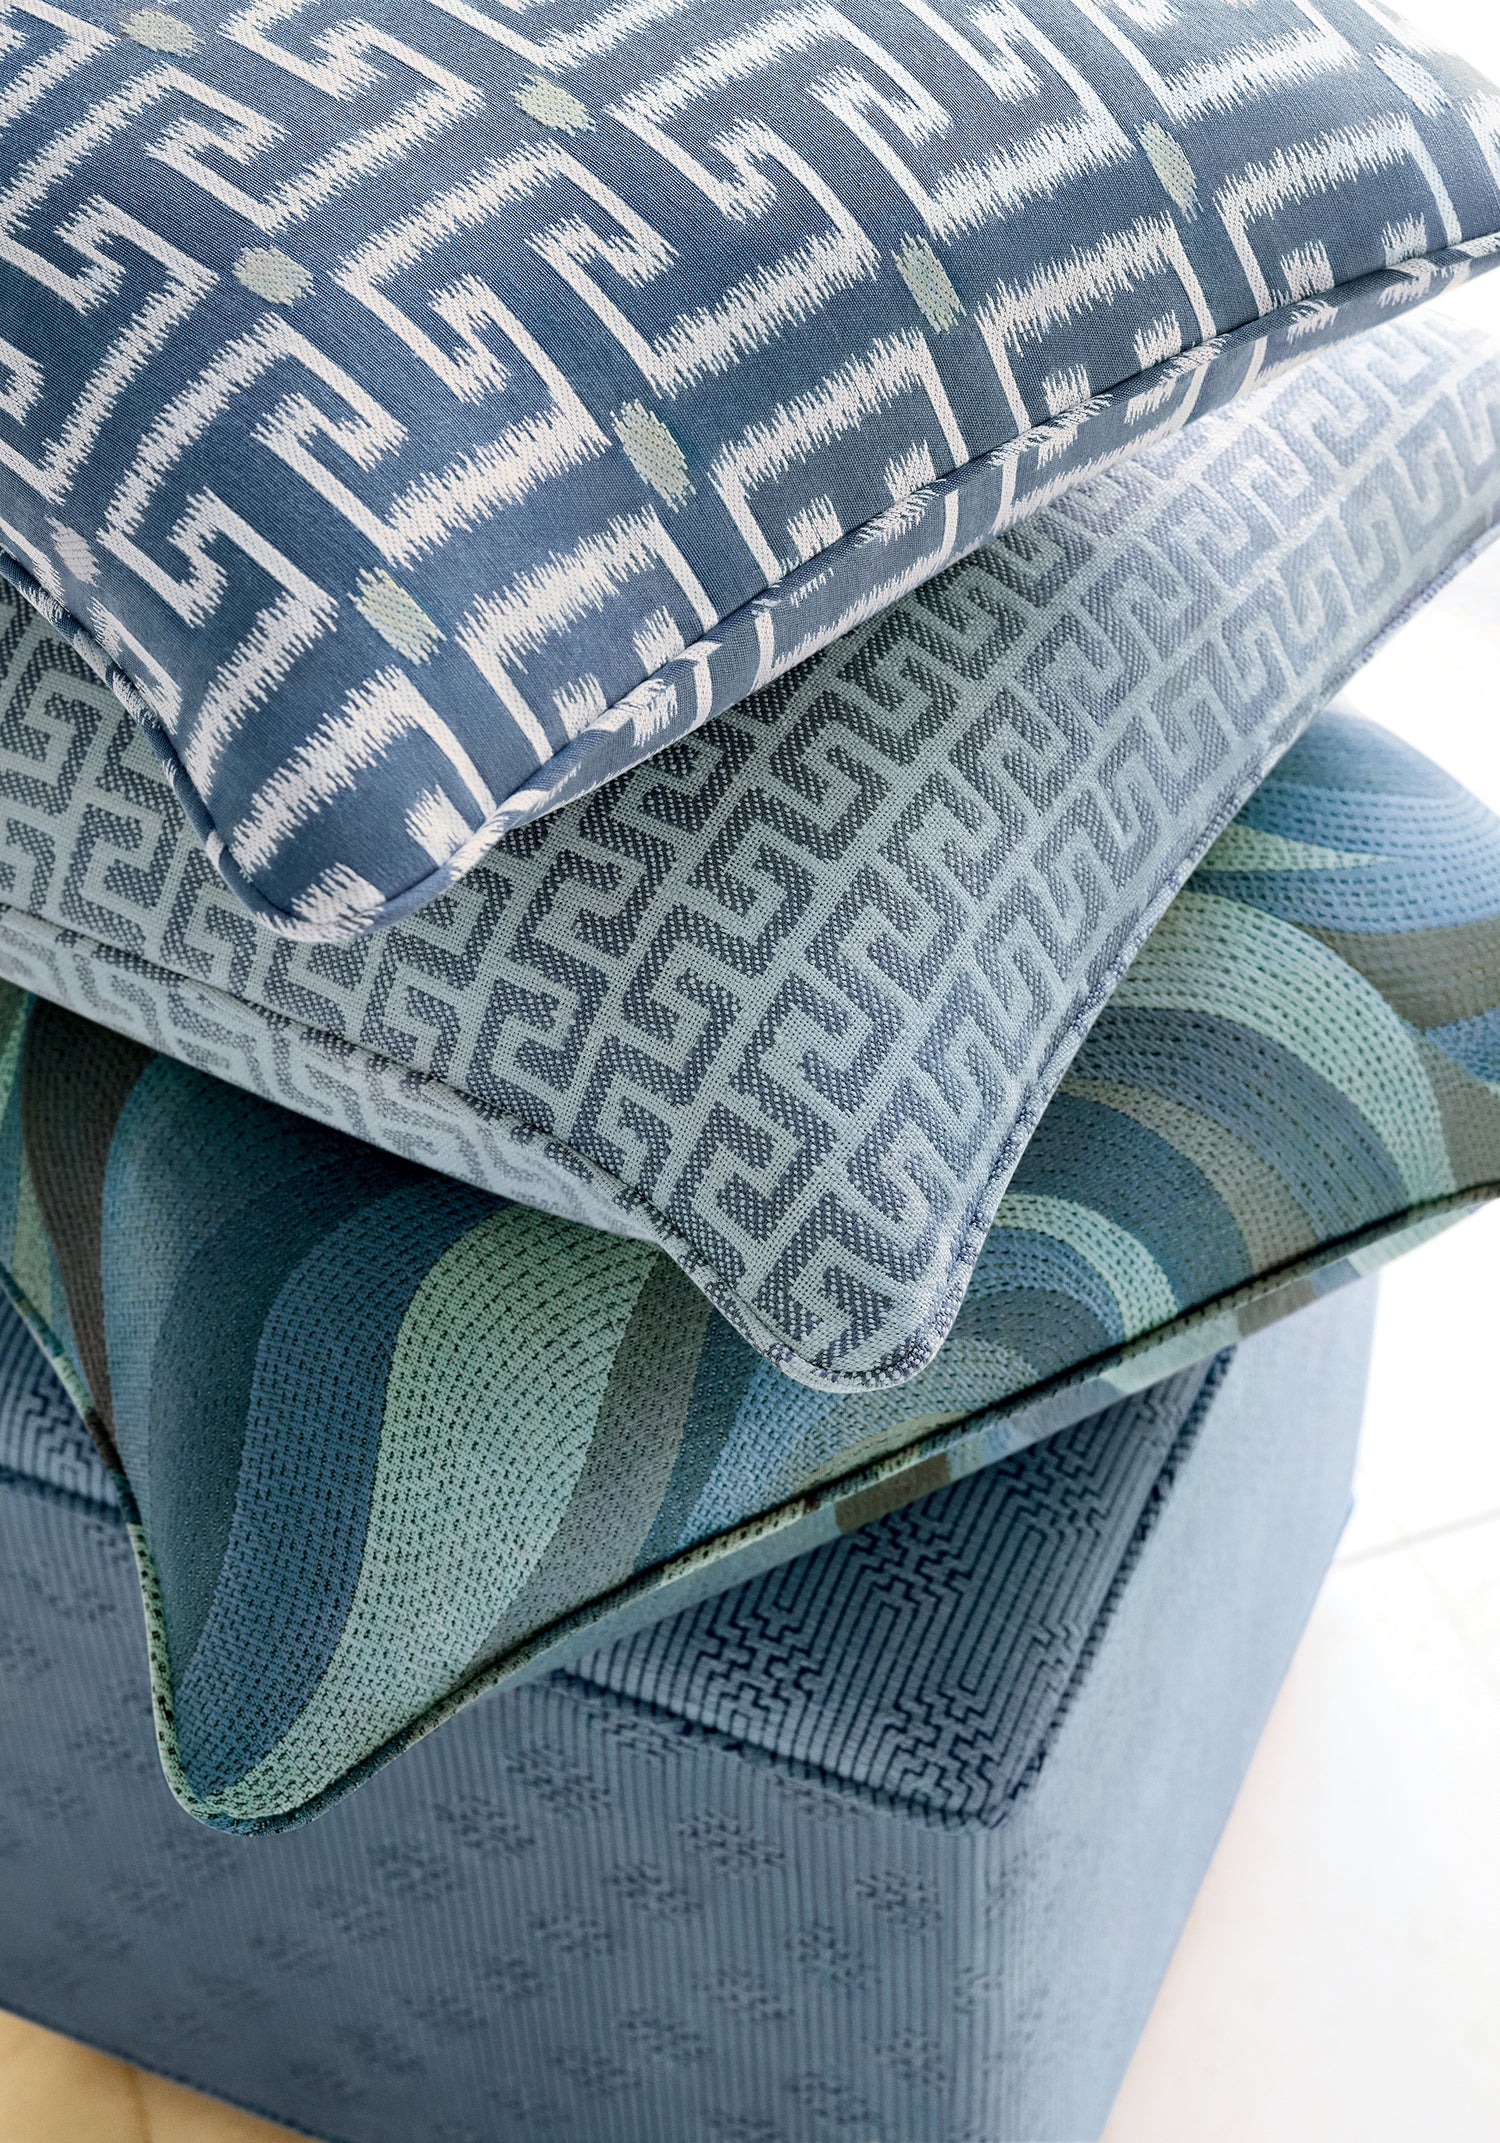 Pillow in Rhodes woven fabric in Heron color - pattern number W74230 - by Thibaut in the Passage collection